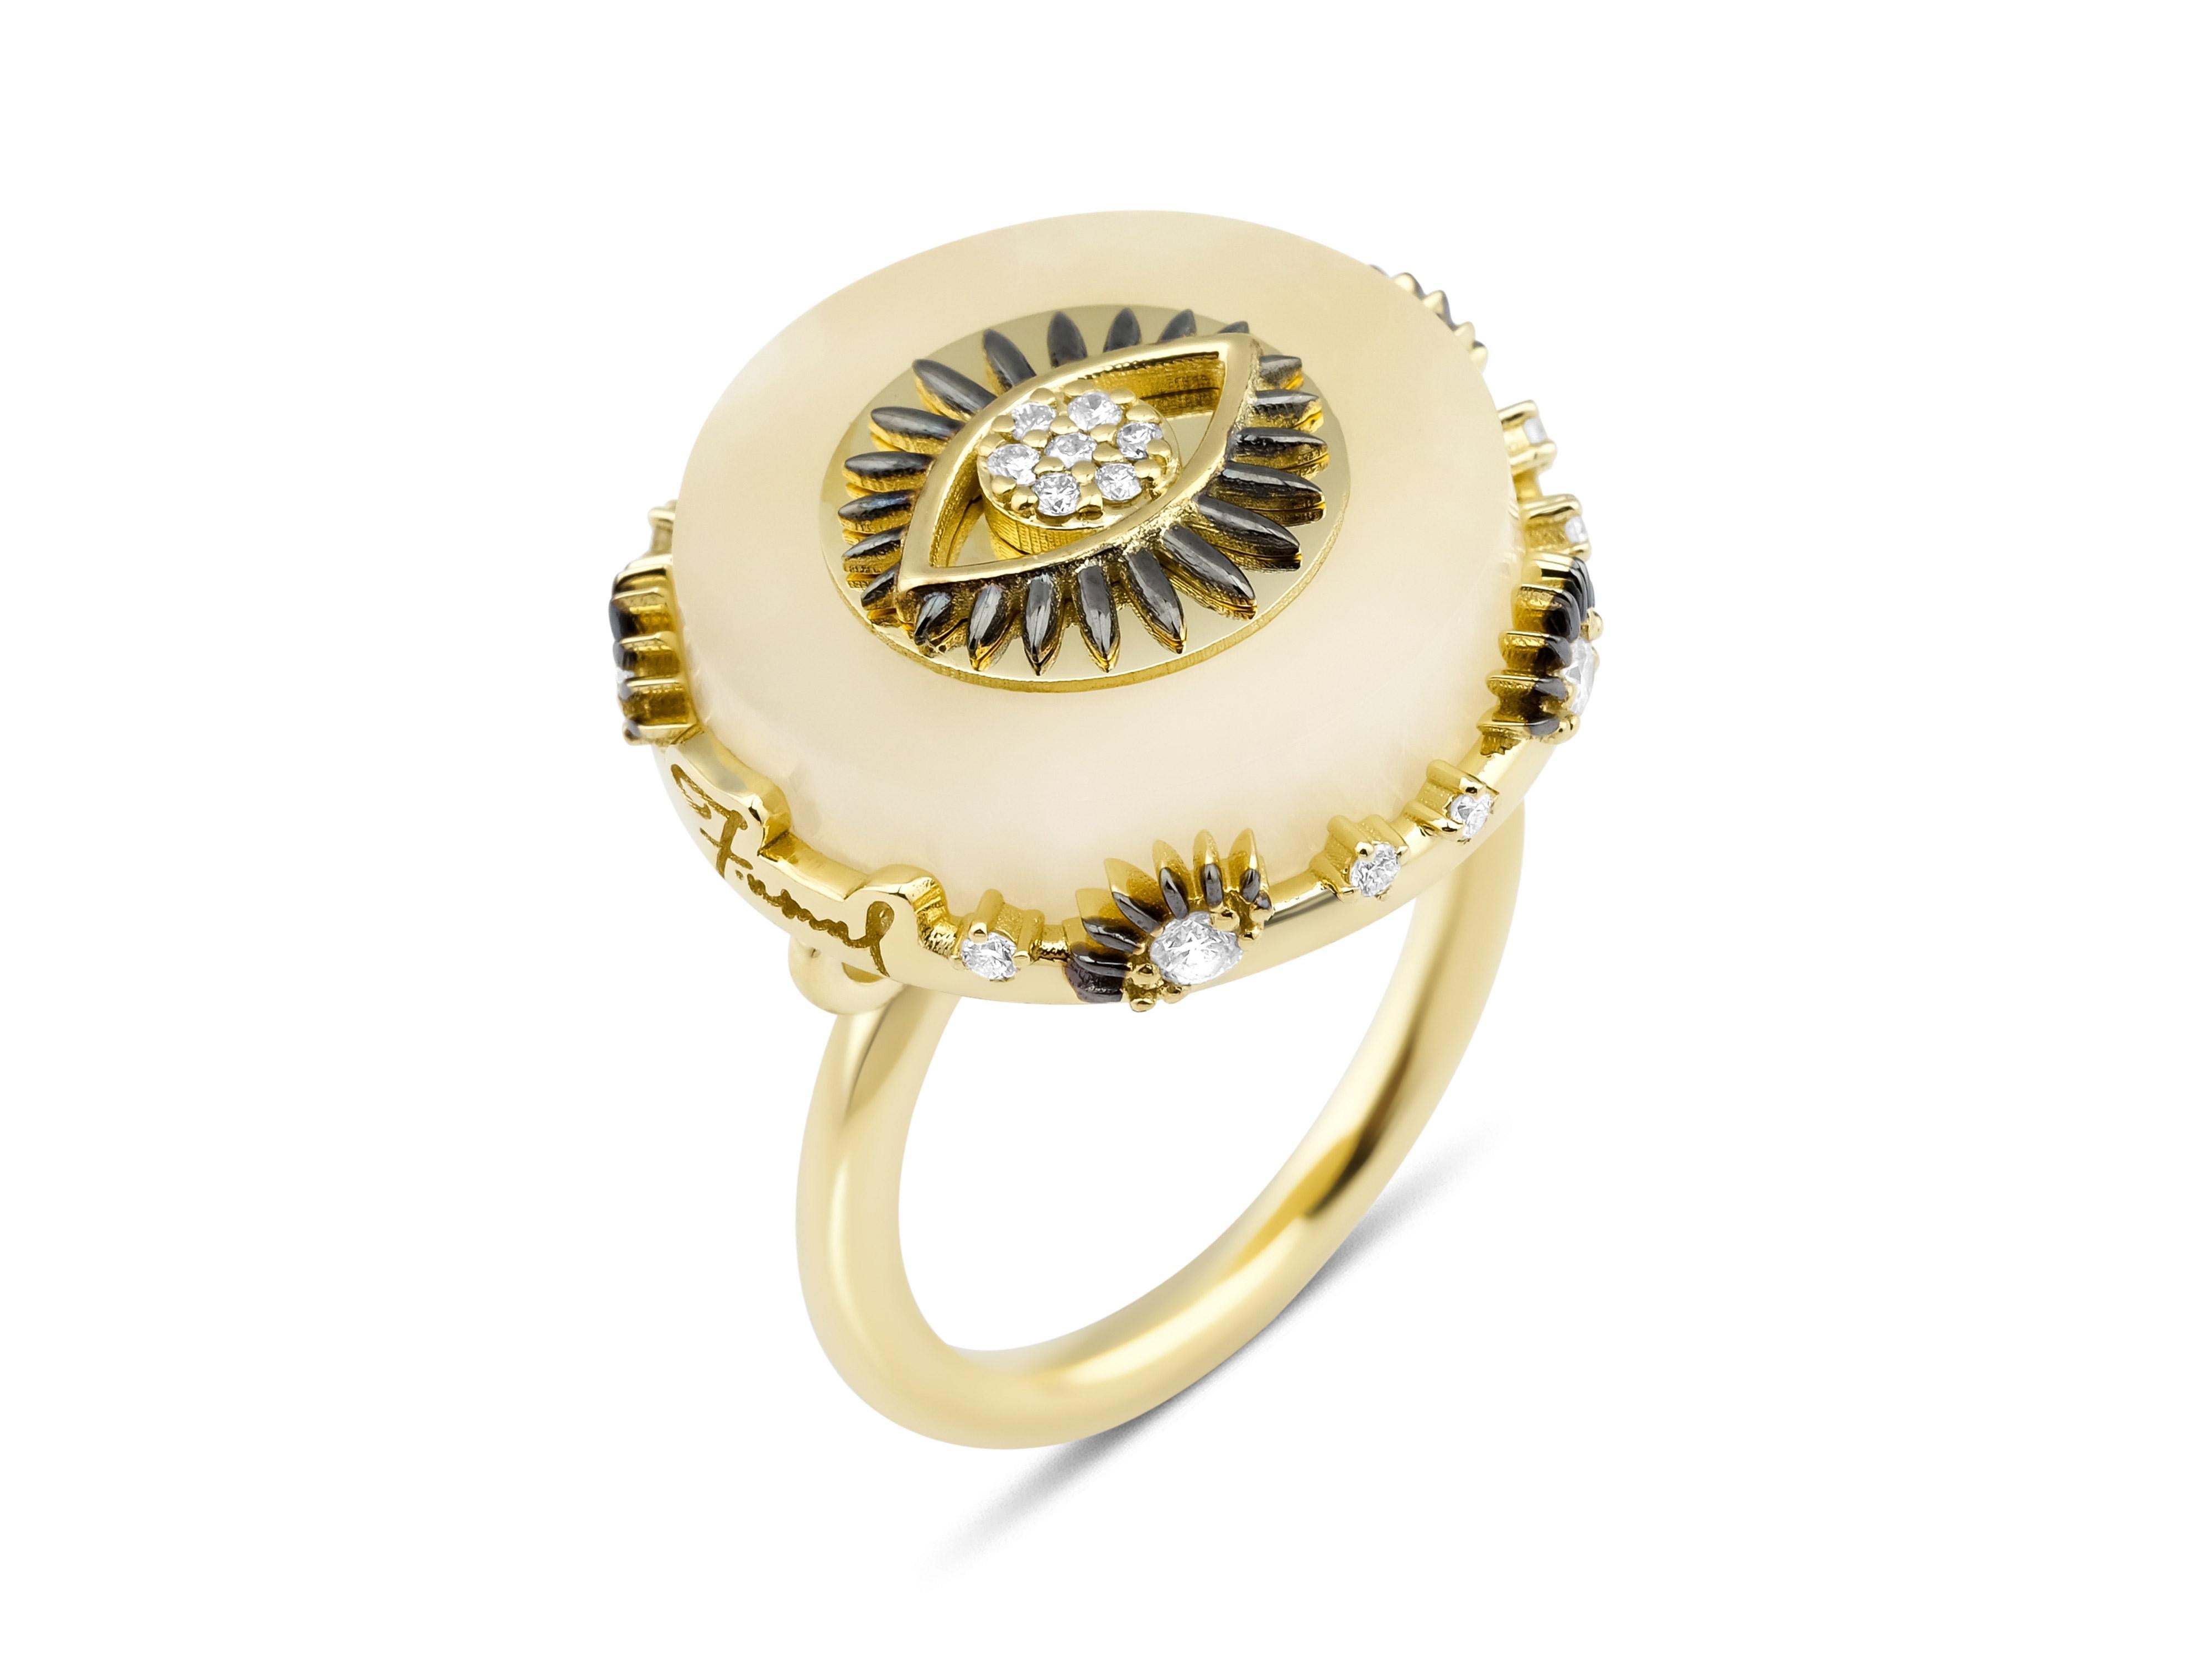 This magnificent evil eye charm marble ring is from our Fumul Marble collection. The ring is 18-carat yellow gold with onyx marble stone. The marble ring weighs 10.11 grams in gold and has round brilliant natural diamonds VS clarity, F color for a